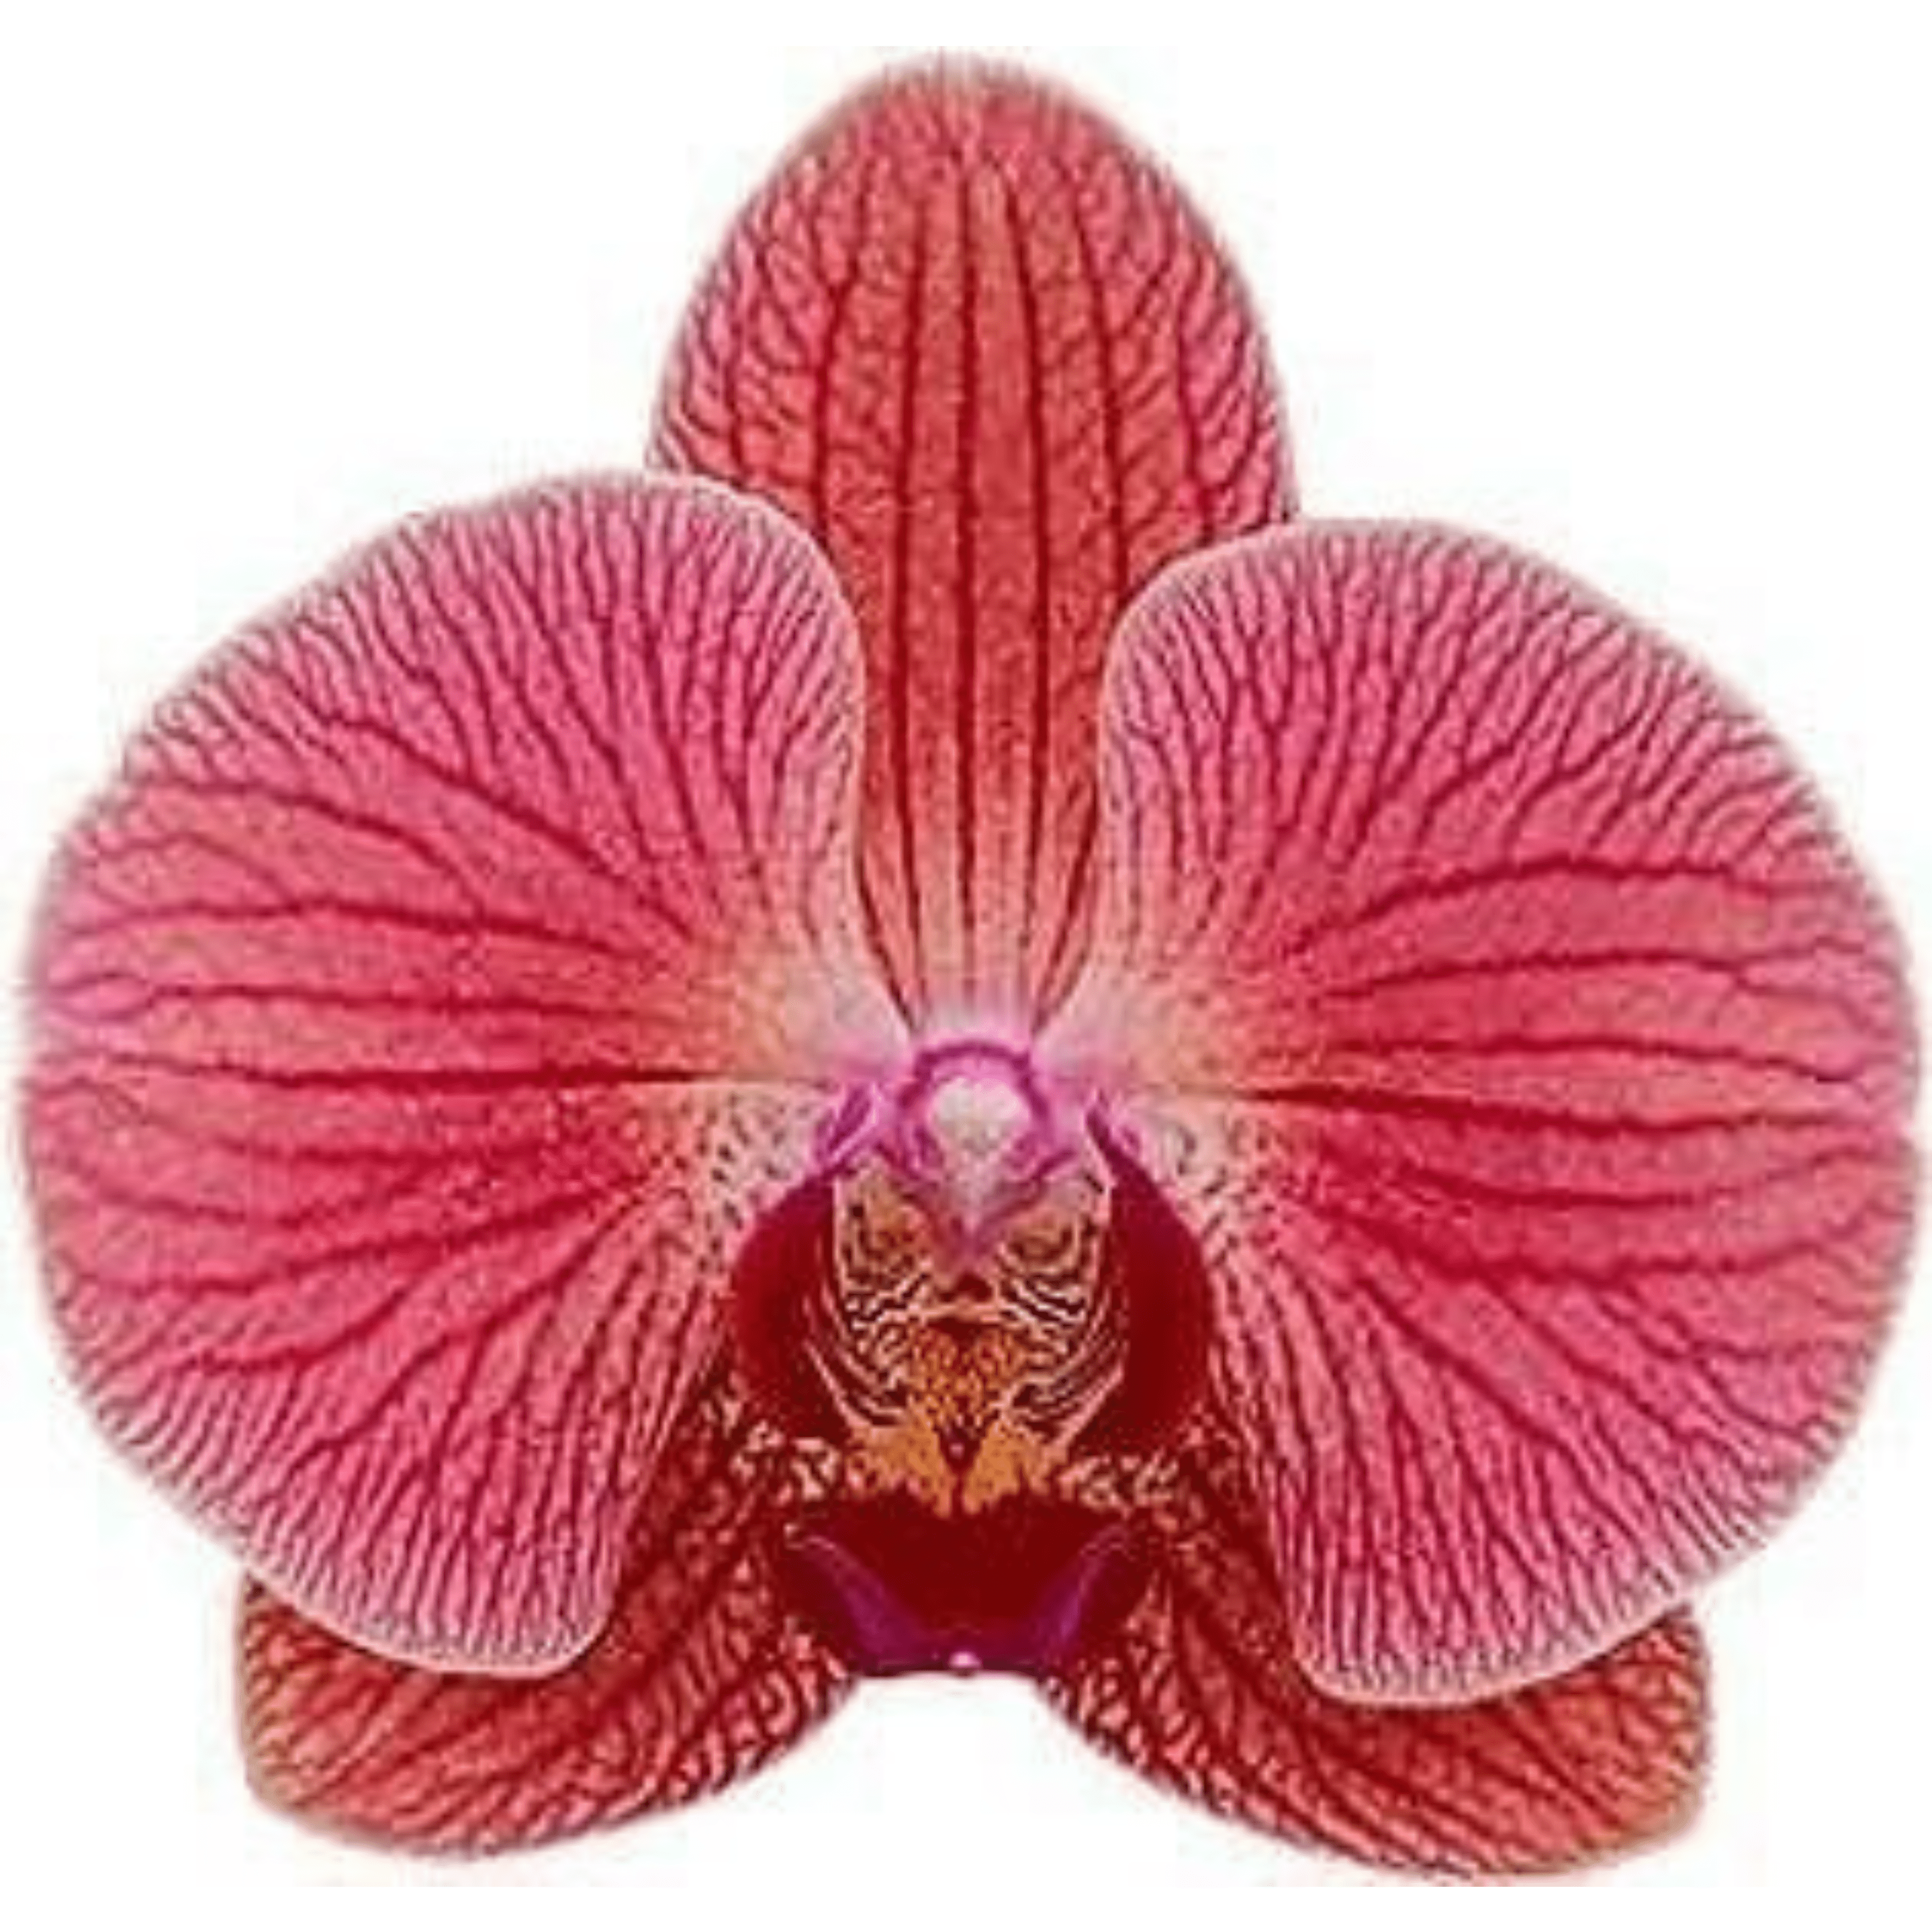 Phalaenopsis Love Day - Blooming Size